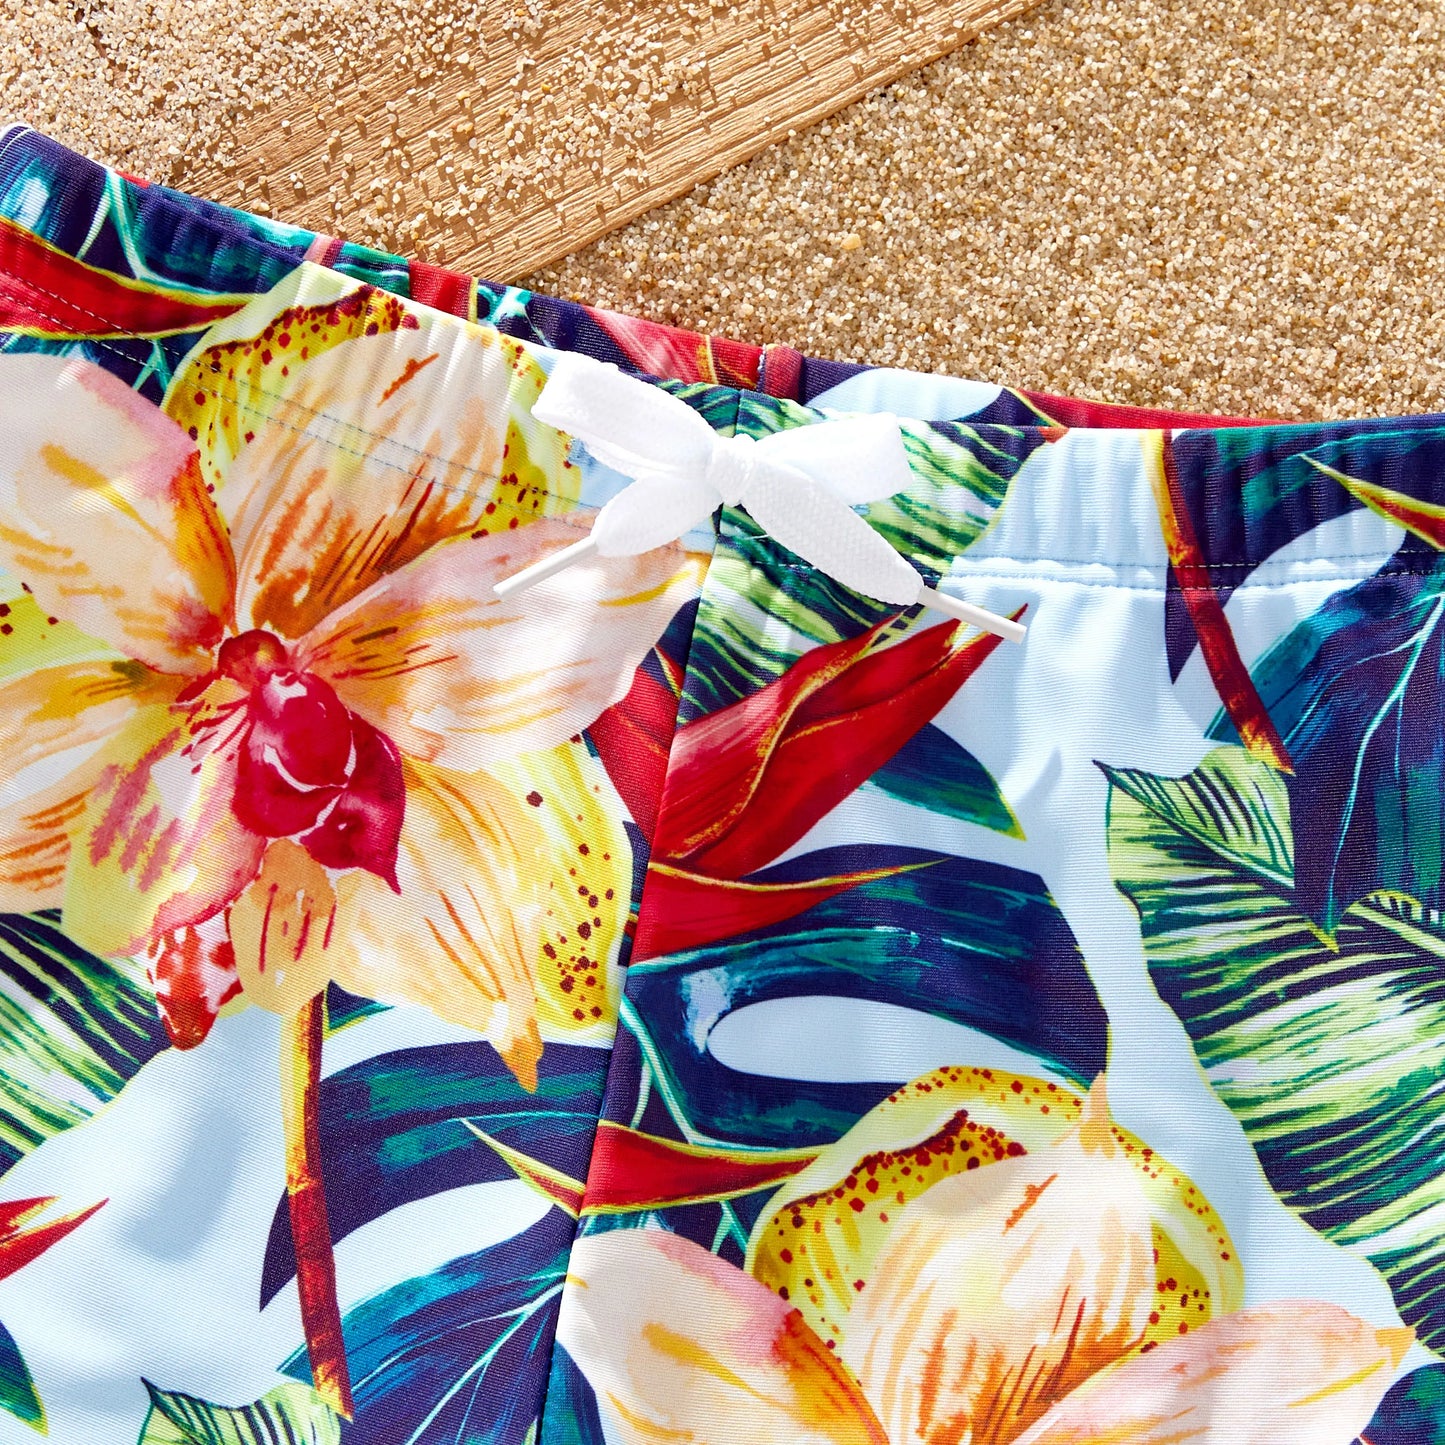 Family Matching! Floral Drawstring Swim Trunks or Ruched Shell Edge Bikini with Optional Swim Cover Up